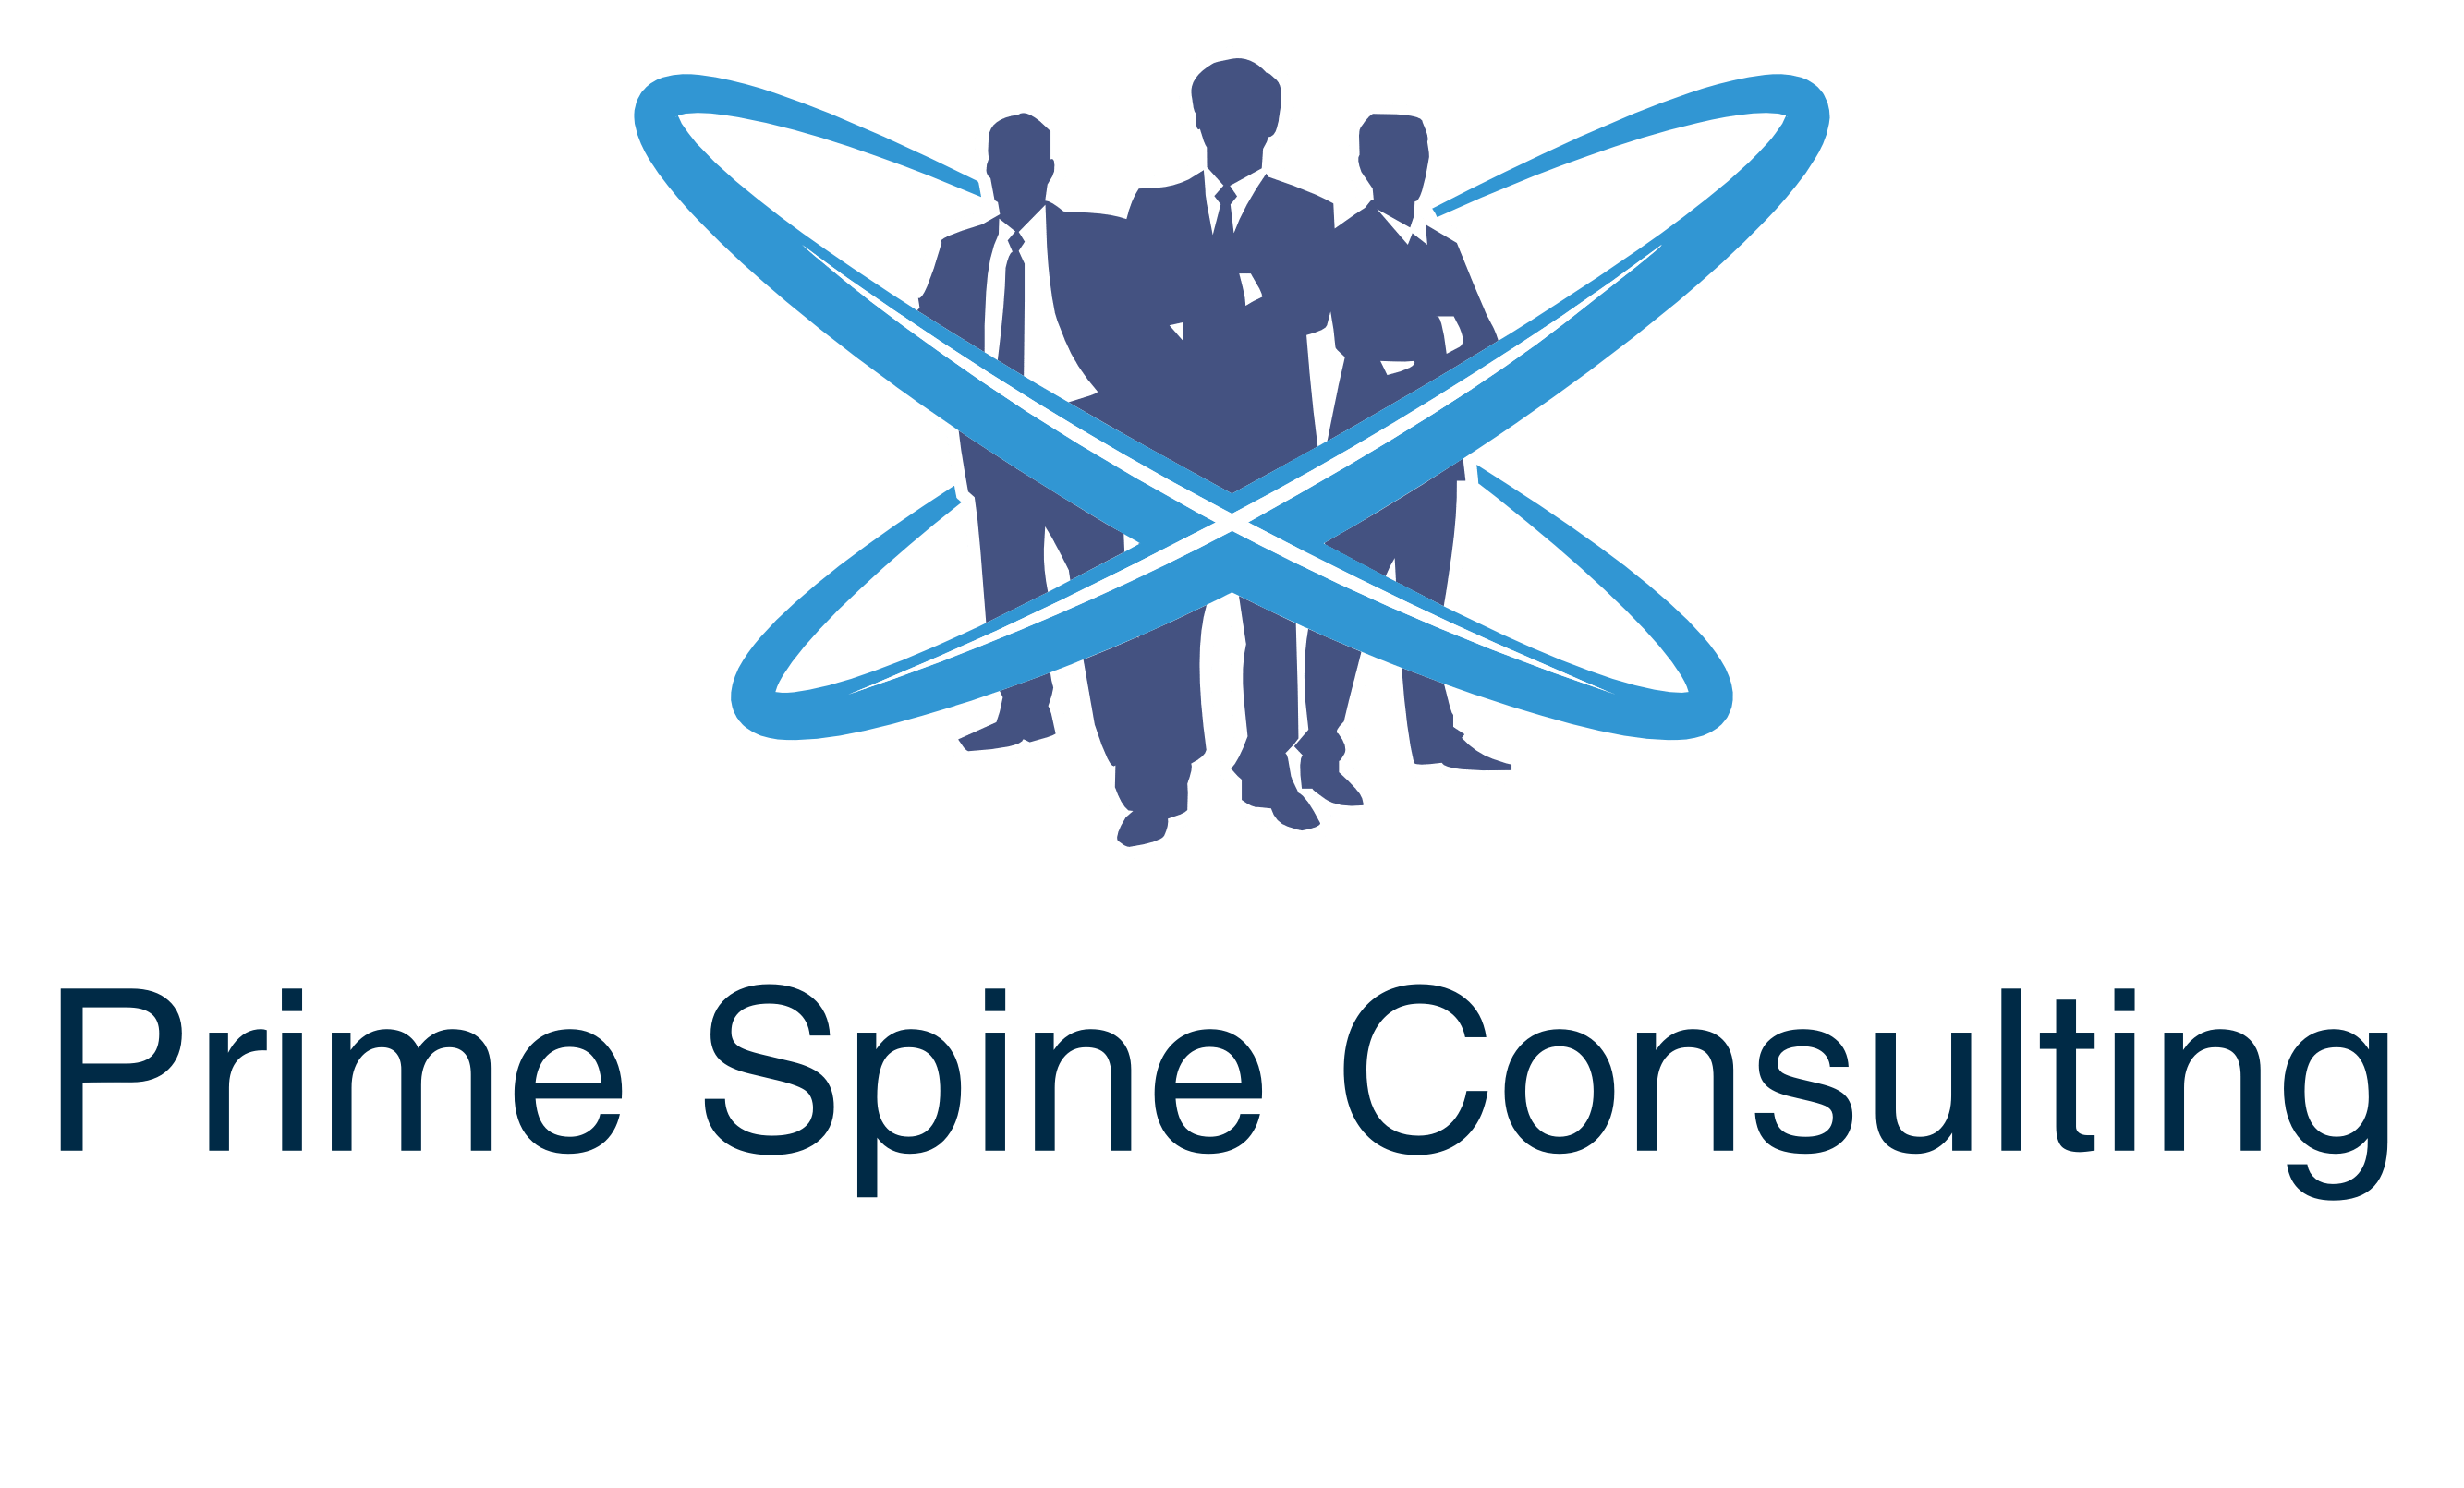 Prime Spine Consulting Logo